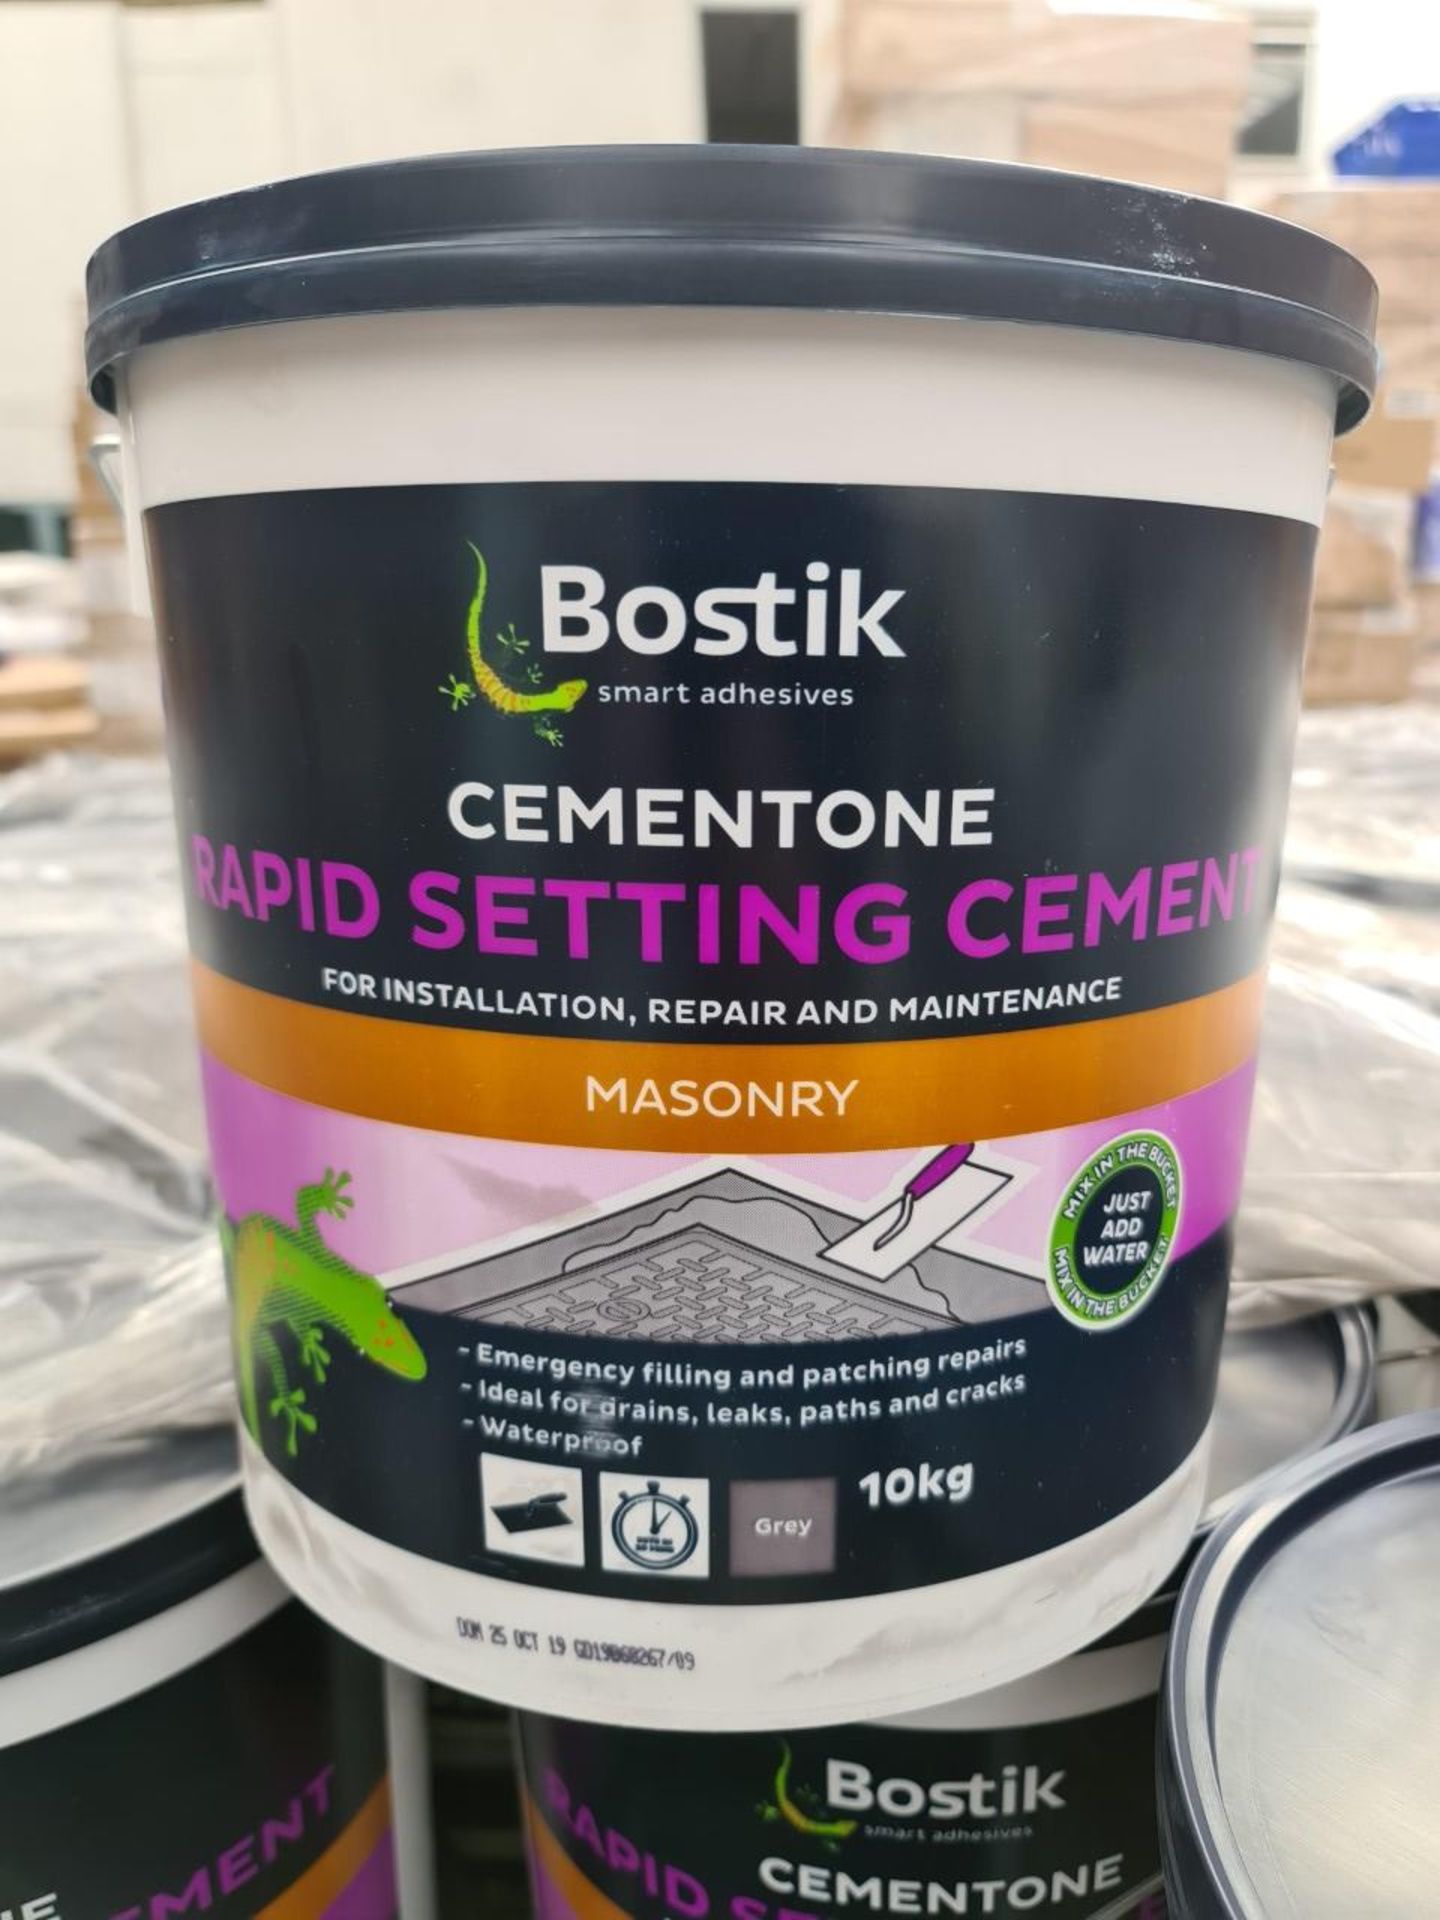 PALLET TO CONTAIN 45 x NEW 10KG BOSTIK CEMENTONE RAPID SETTING CEMENT. FOR INSTALLATION, REPAIR &